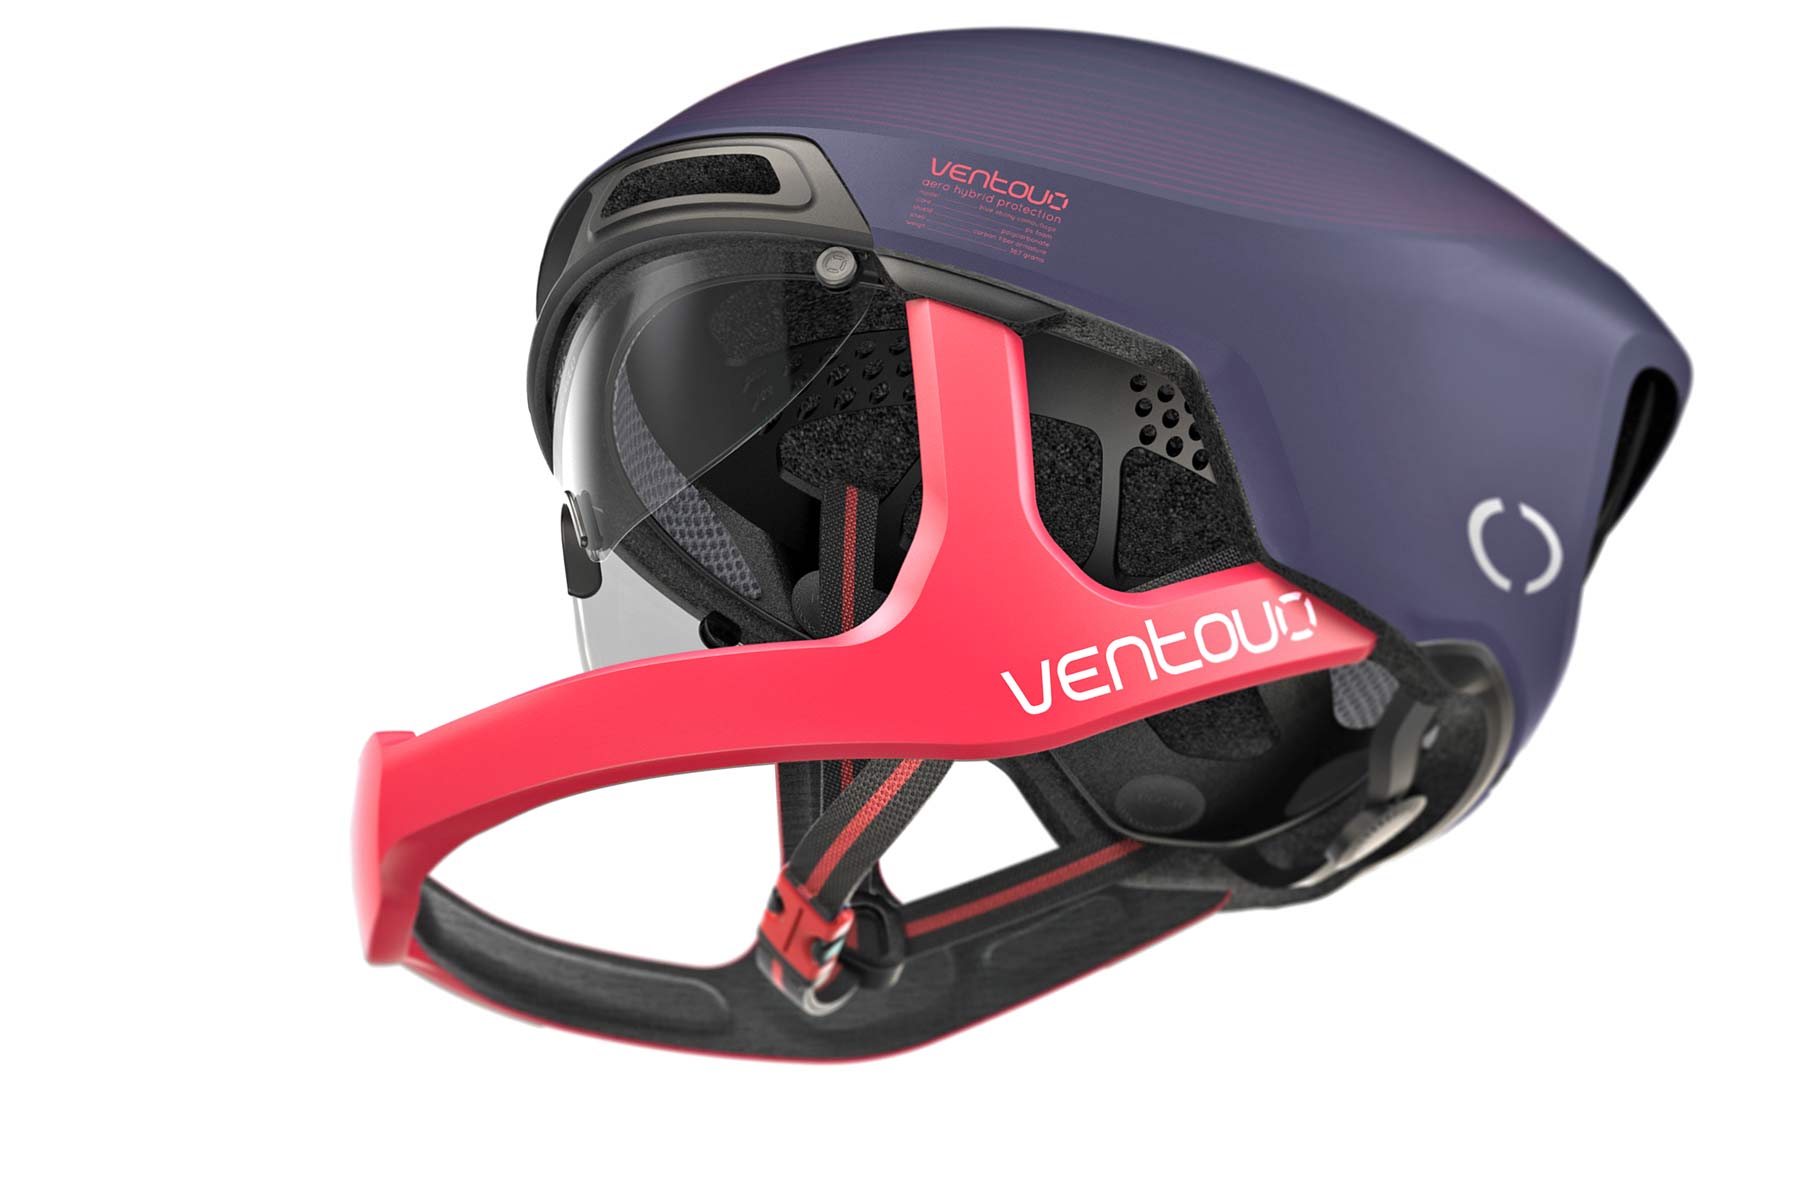 Ventoux cycling helmet concept aims for aero full-face road riding protection